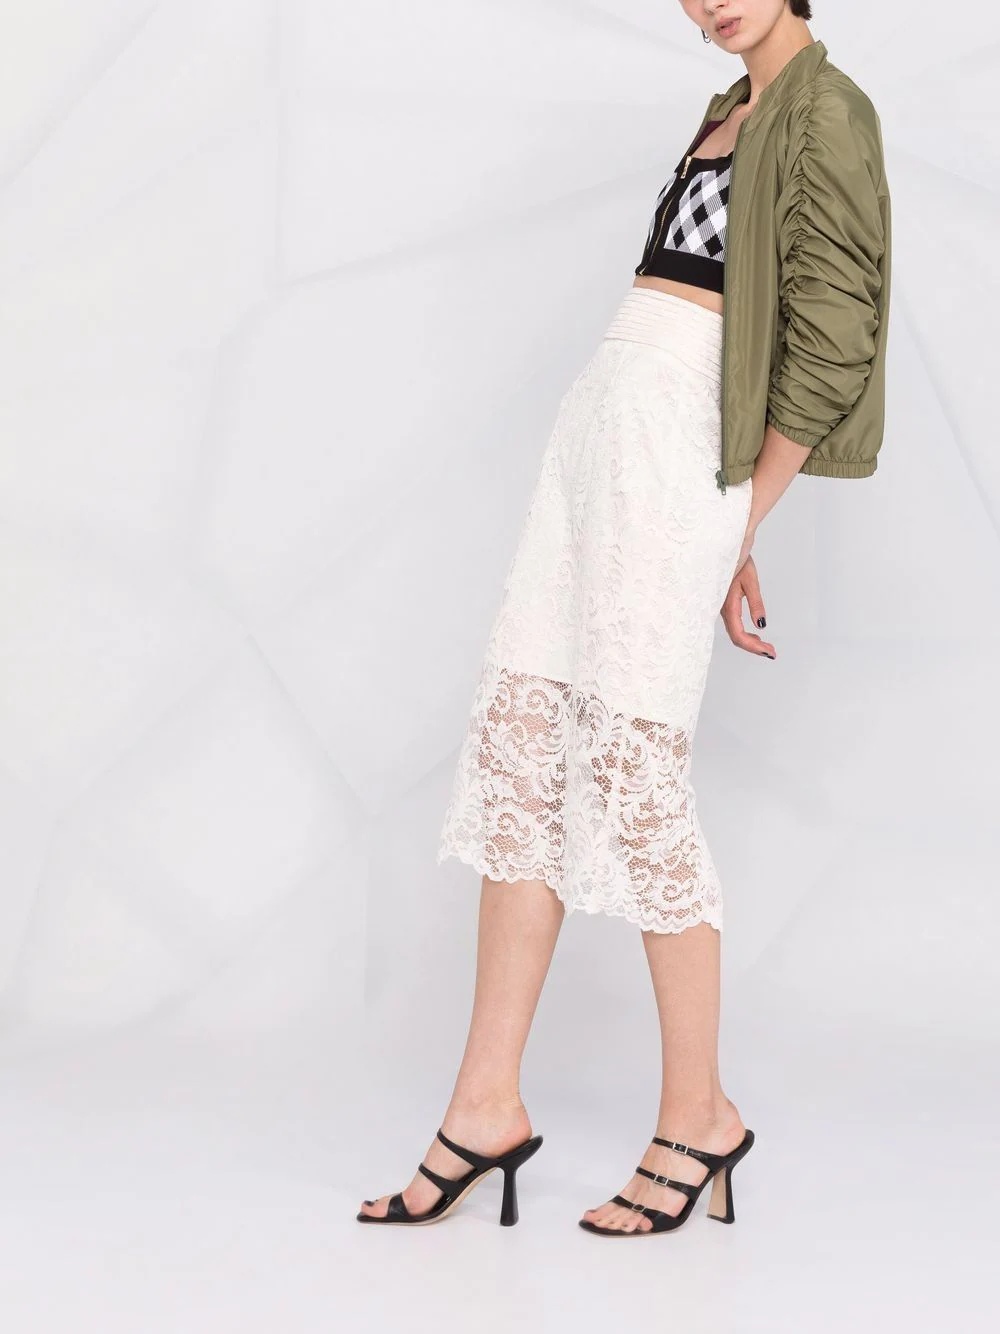 lace-patterned pencil skirt - 4